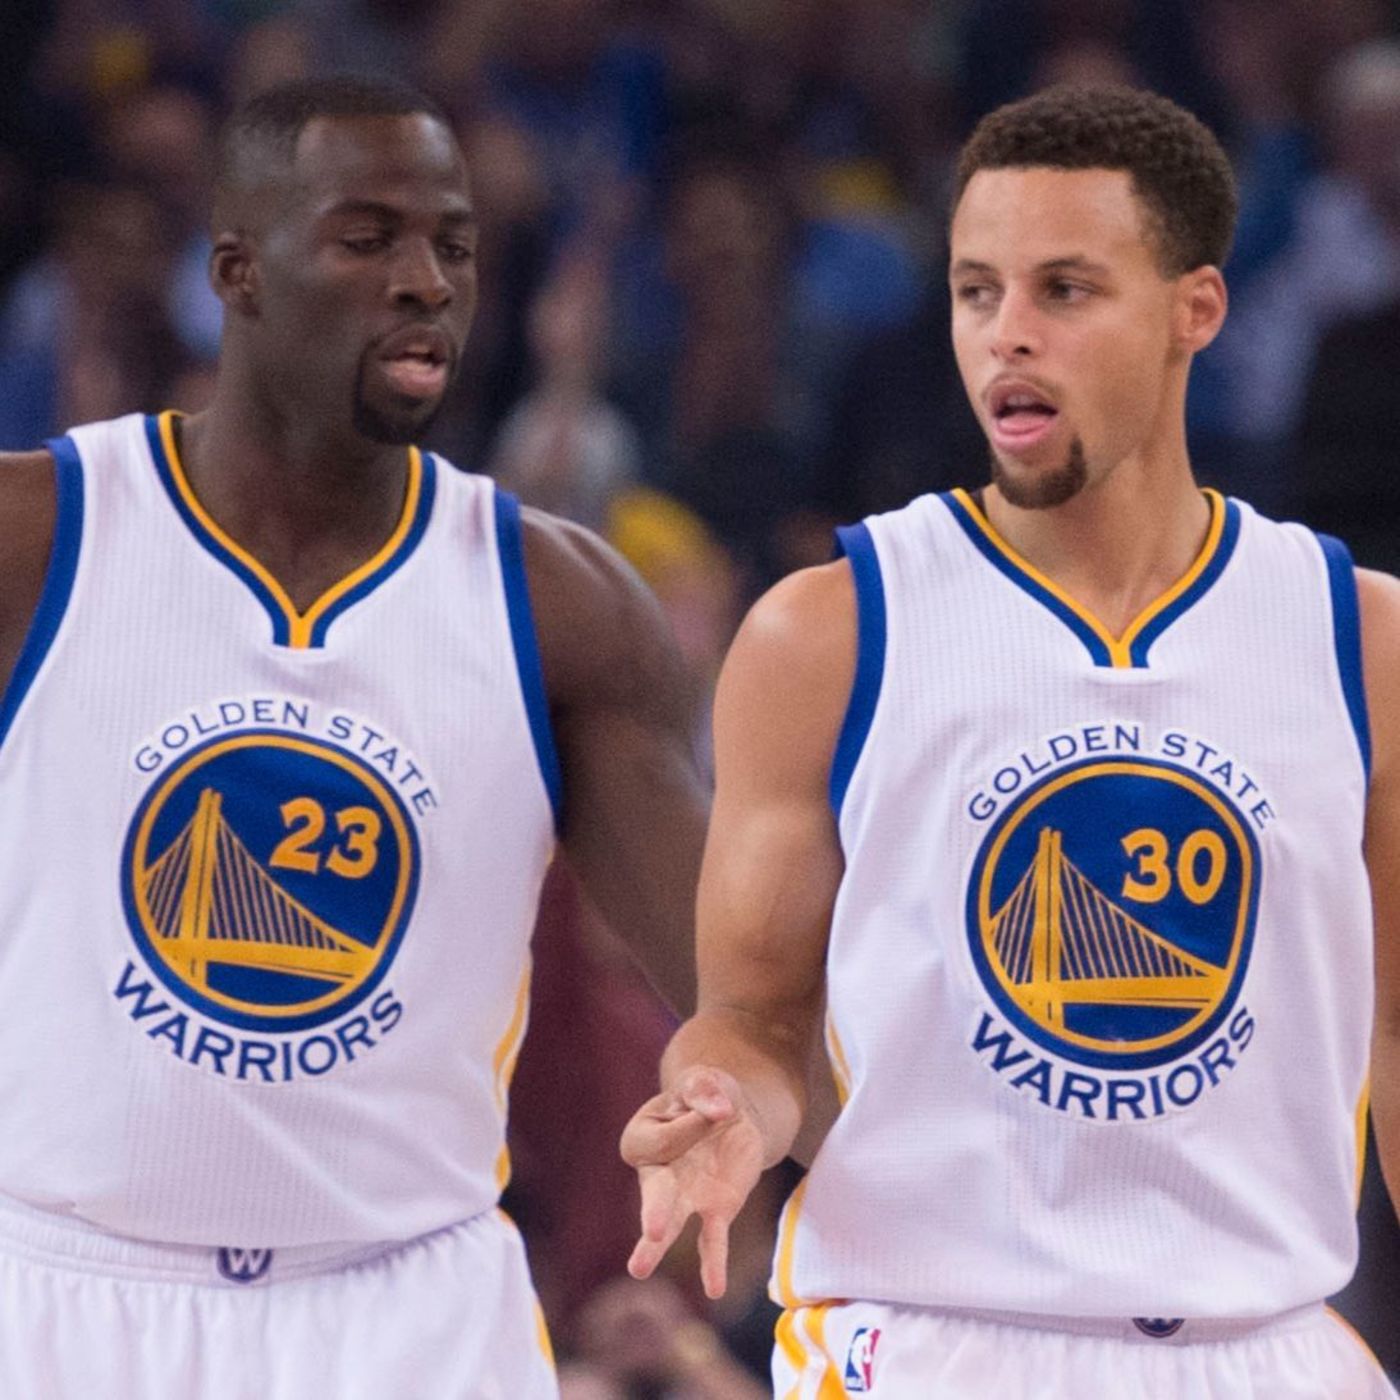 Chronicling the Golden State Warriors